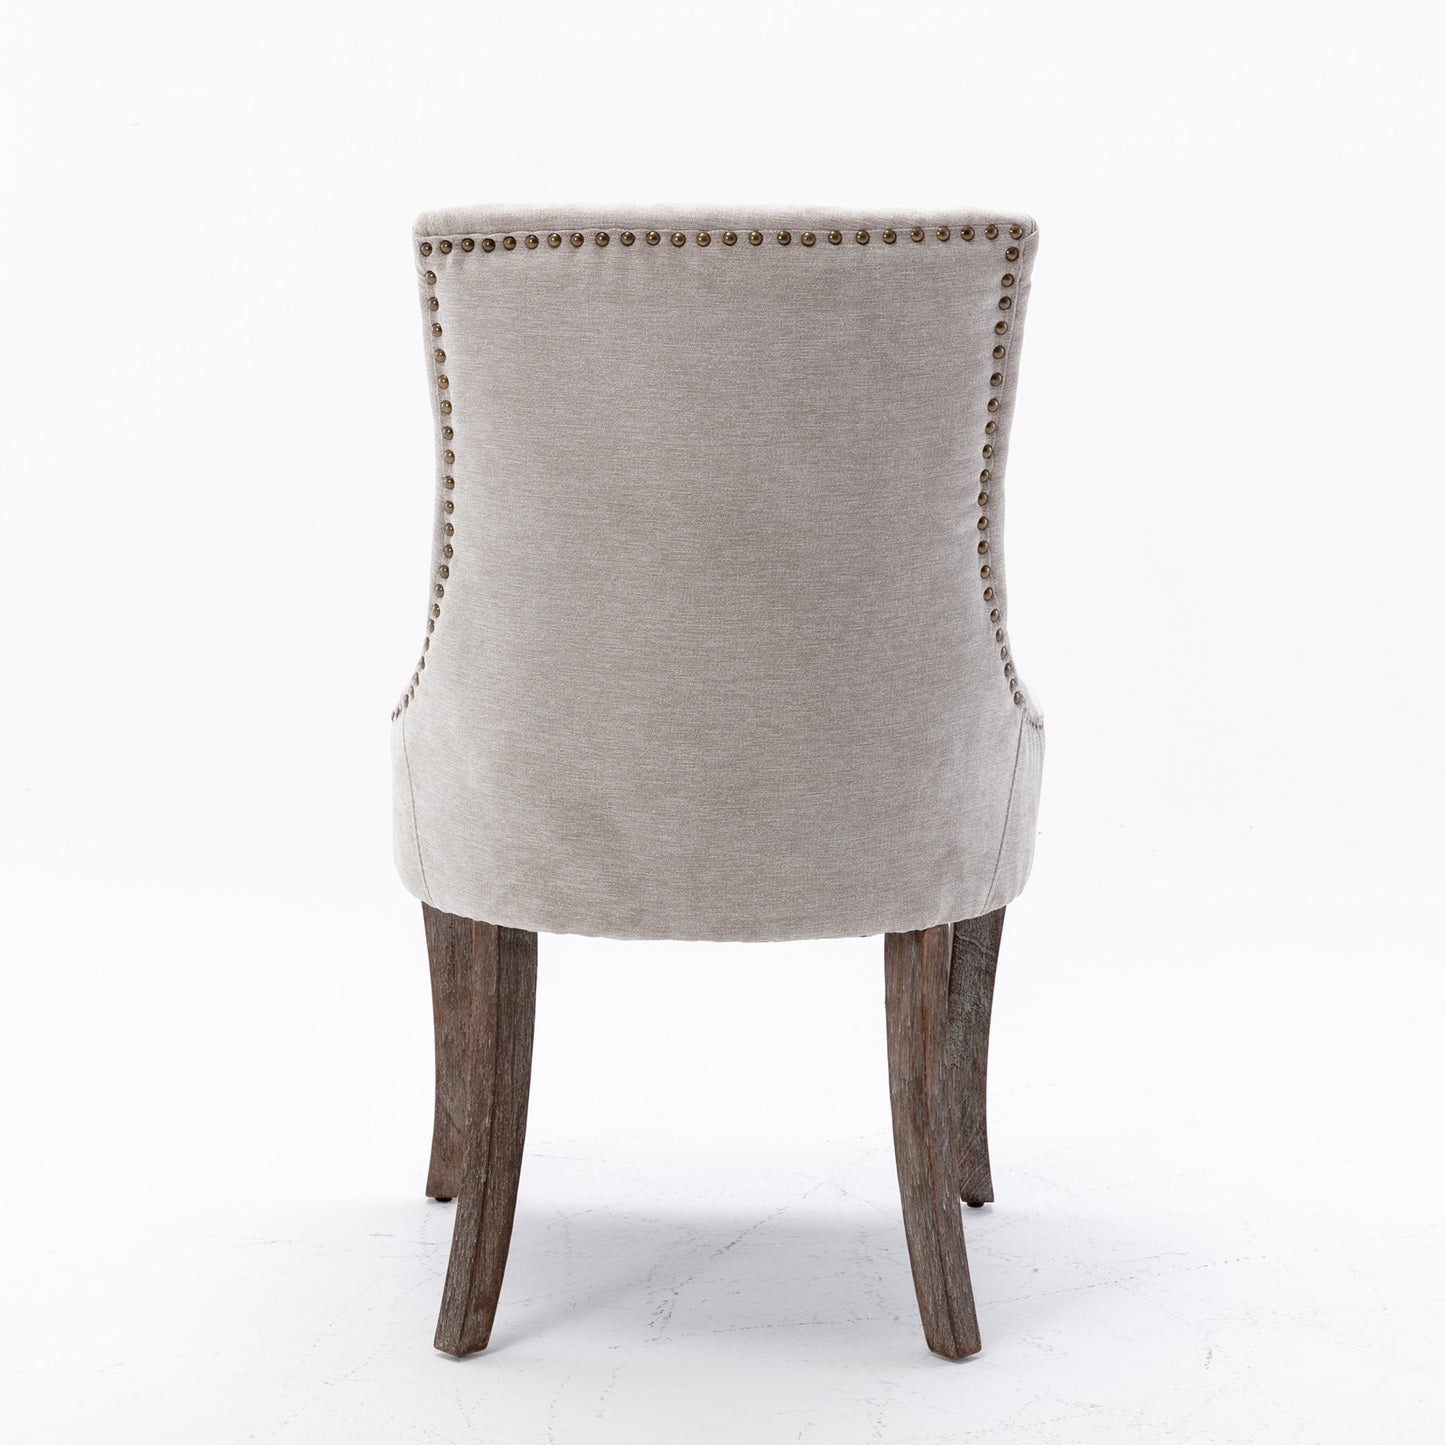 A&A Furniture Dining Chairs with Thickened Padded Seats & Weathered Legs Set of 2 - Beige